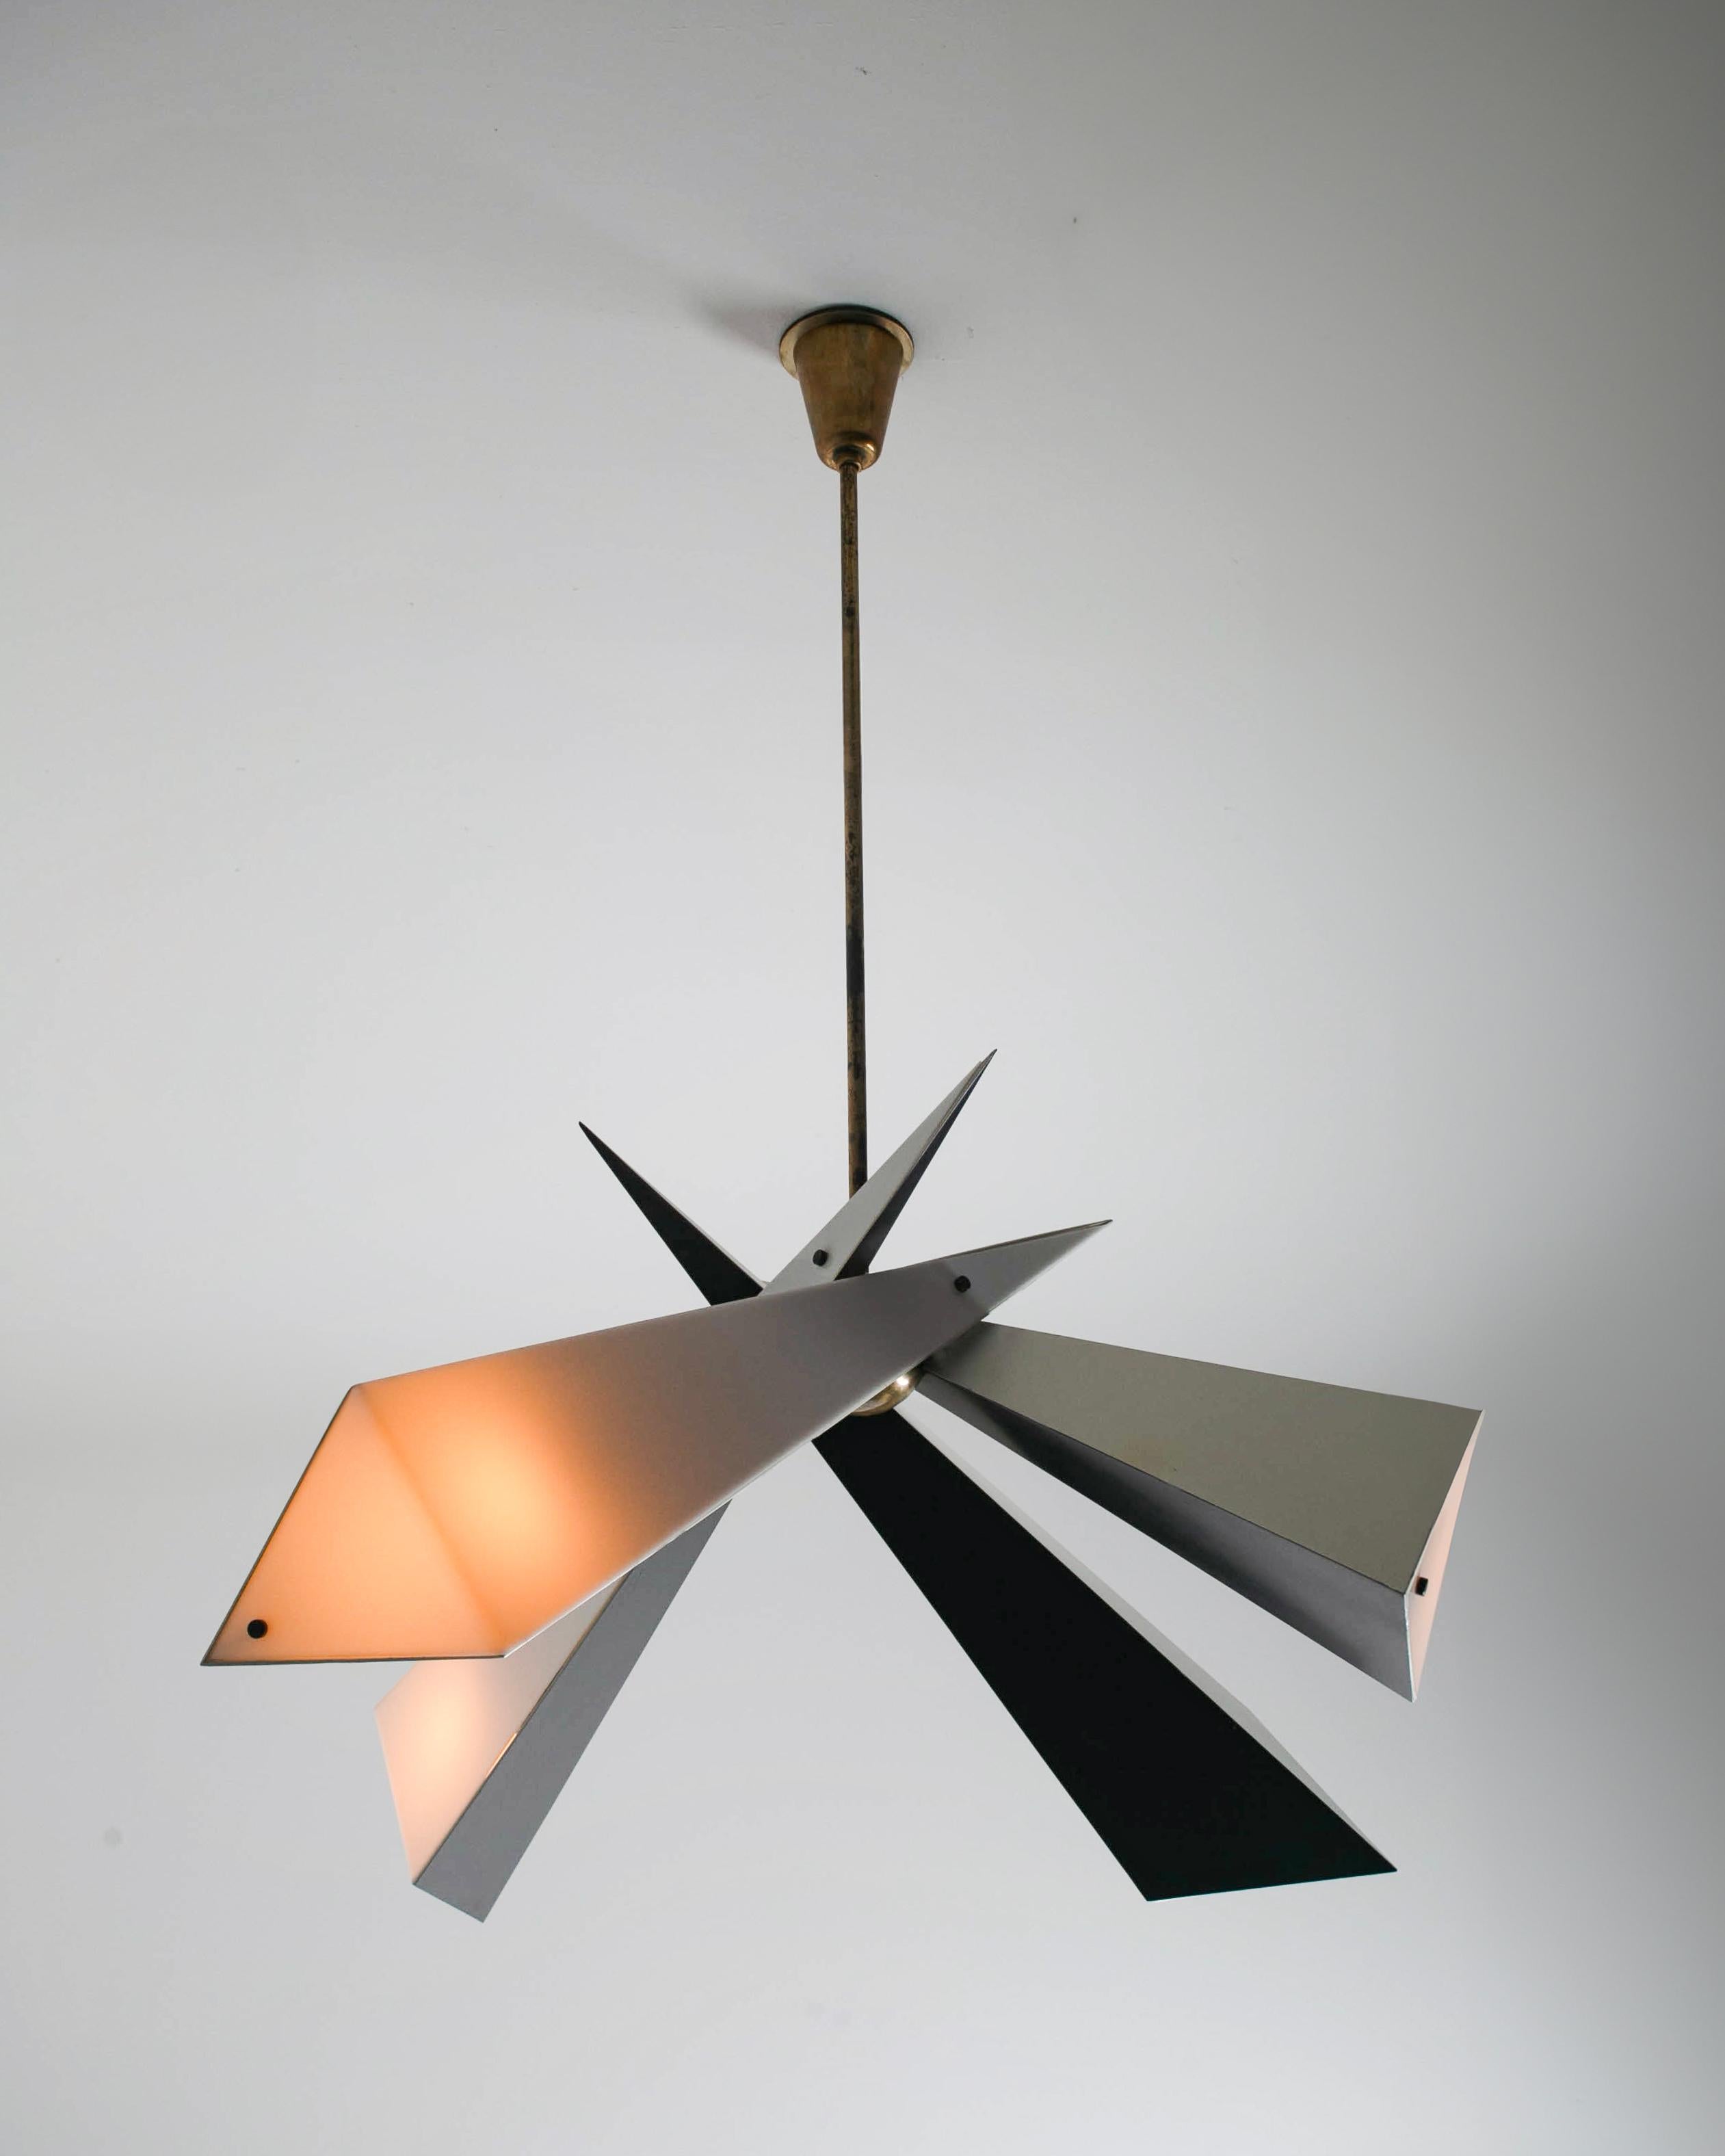 Ceiling Light by Angelo Lelii for Arredoluce. Designed and manufactured in Italy, circa the late 1950s. An off-shoot of the models 12739, 12772 in a series by Lelii and Arredoluce. This visually striking chandelier consists of four cross-sectioned